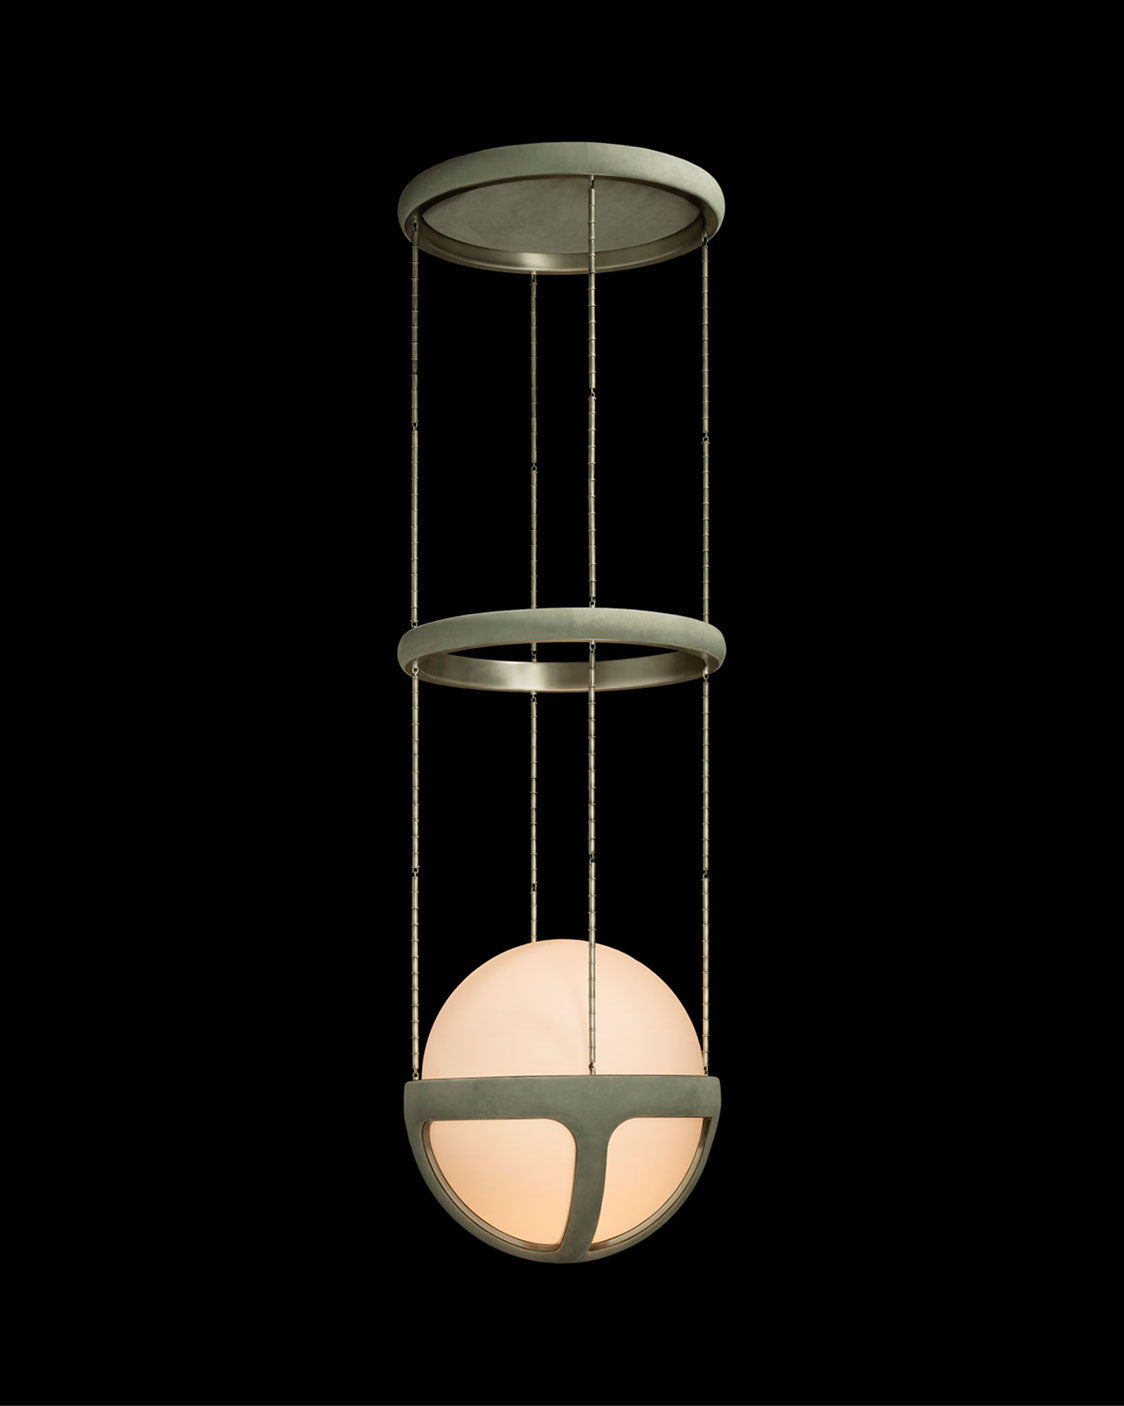 REPRISE ceiling pendant in Ice Suede and Tarnished Silver finish, hanging against a black background. 